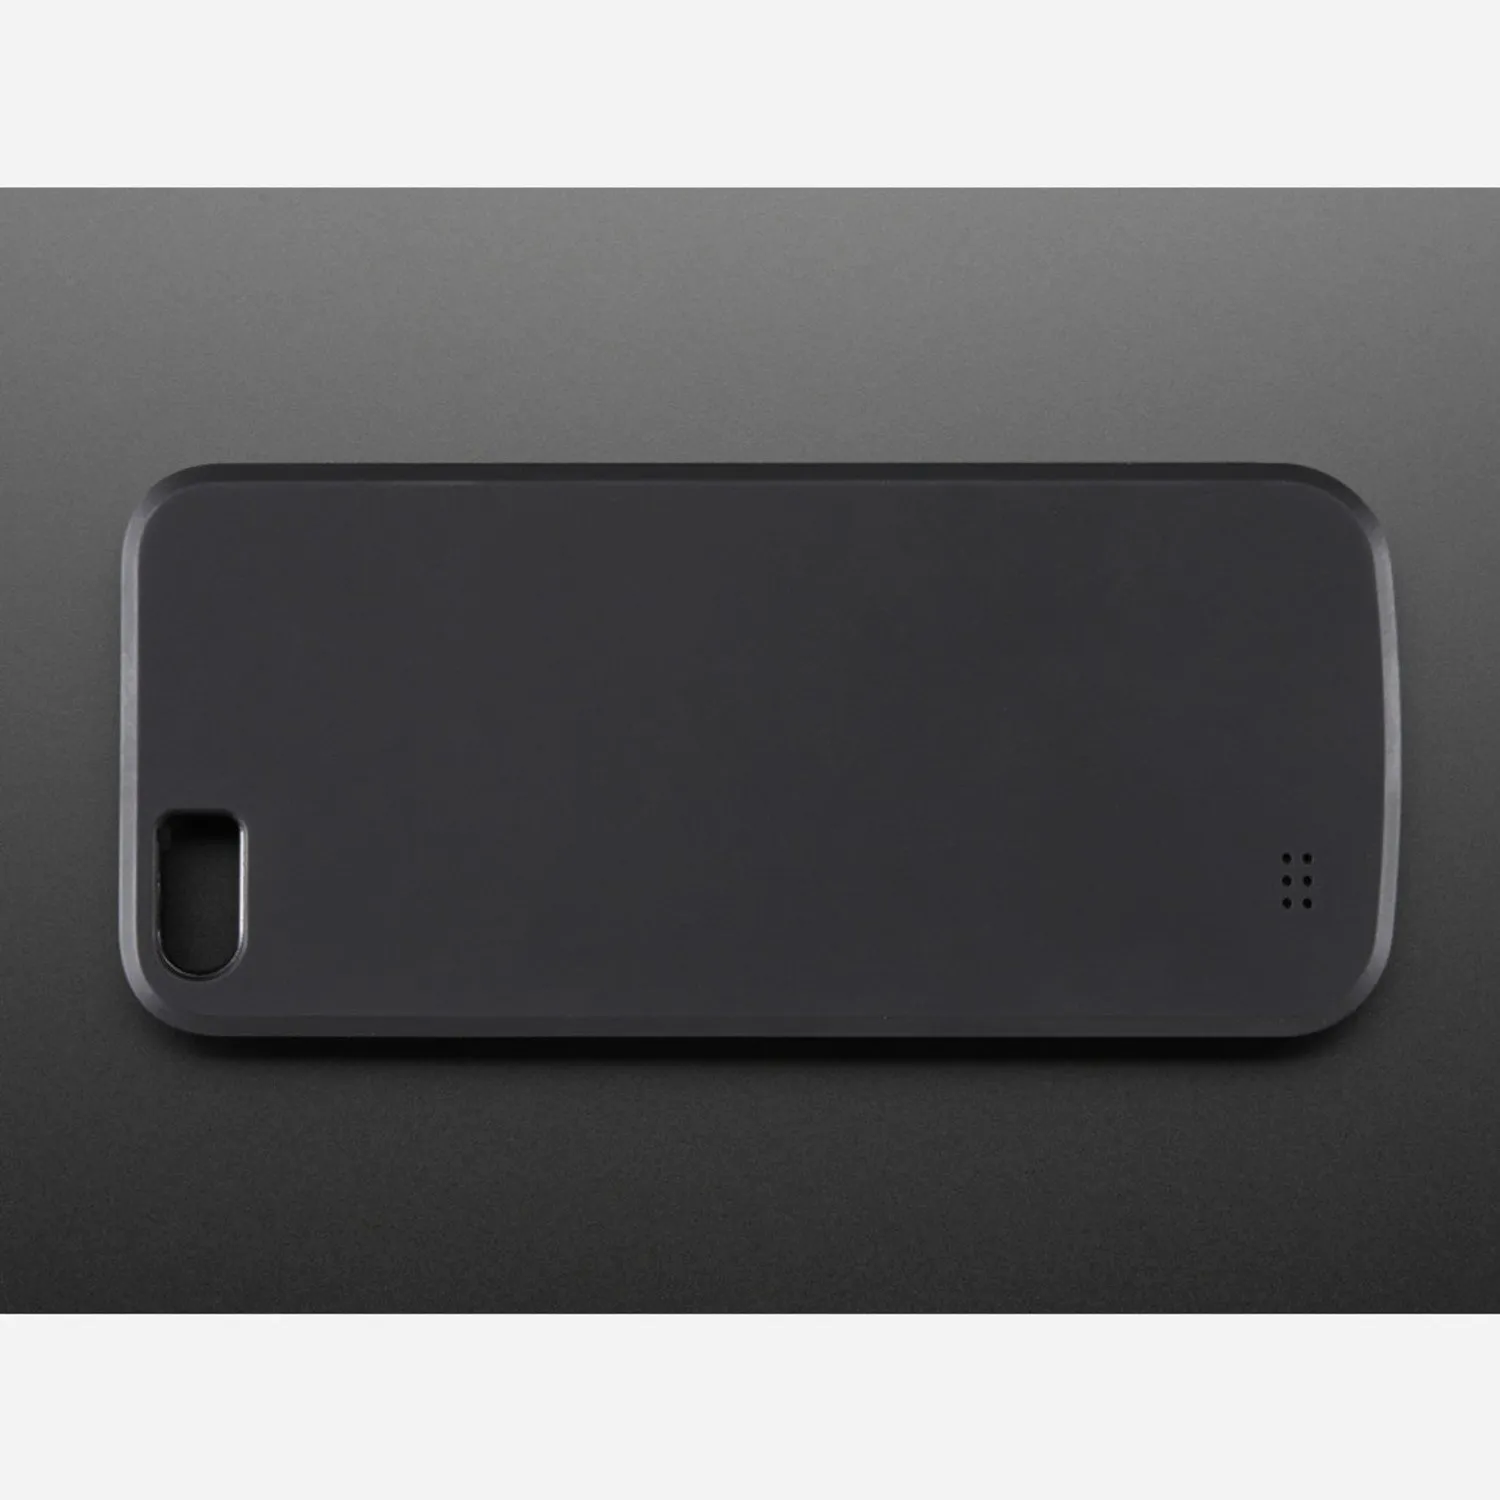 Photo of Qi Wireless Charger Sleeve - iPhone 5 Lightning Connector